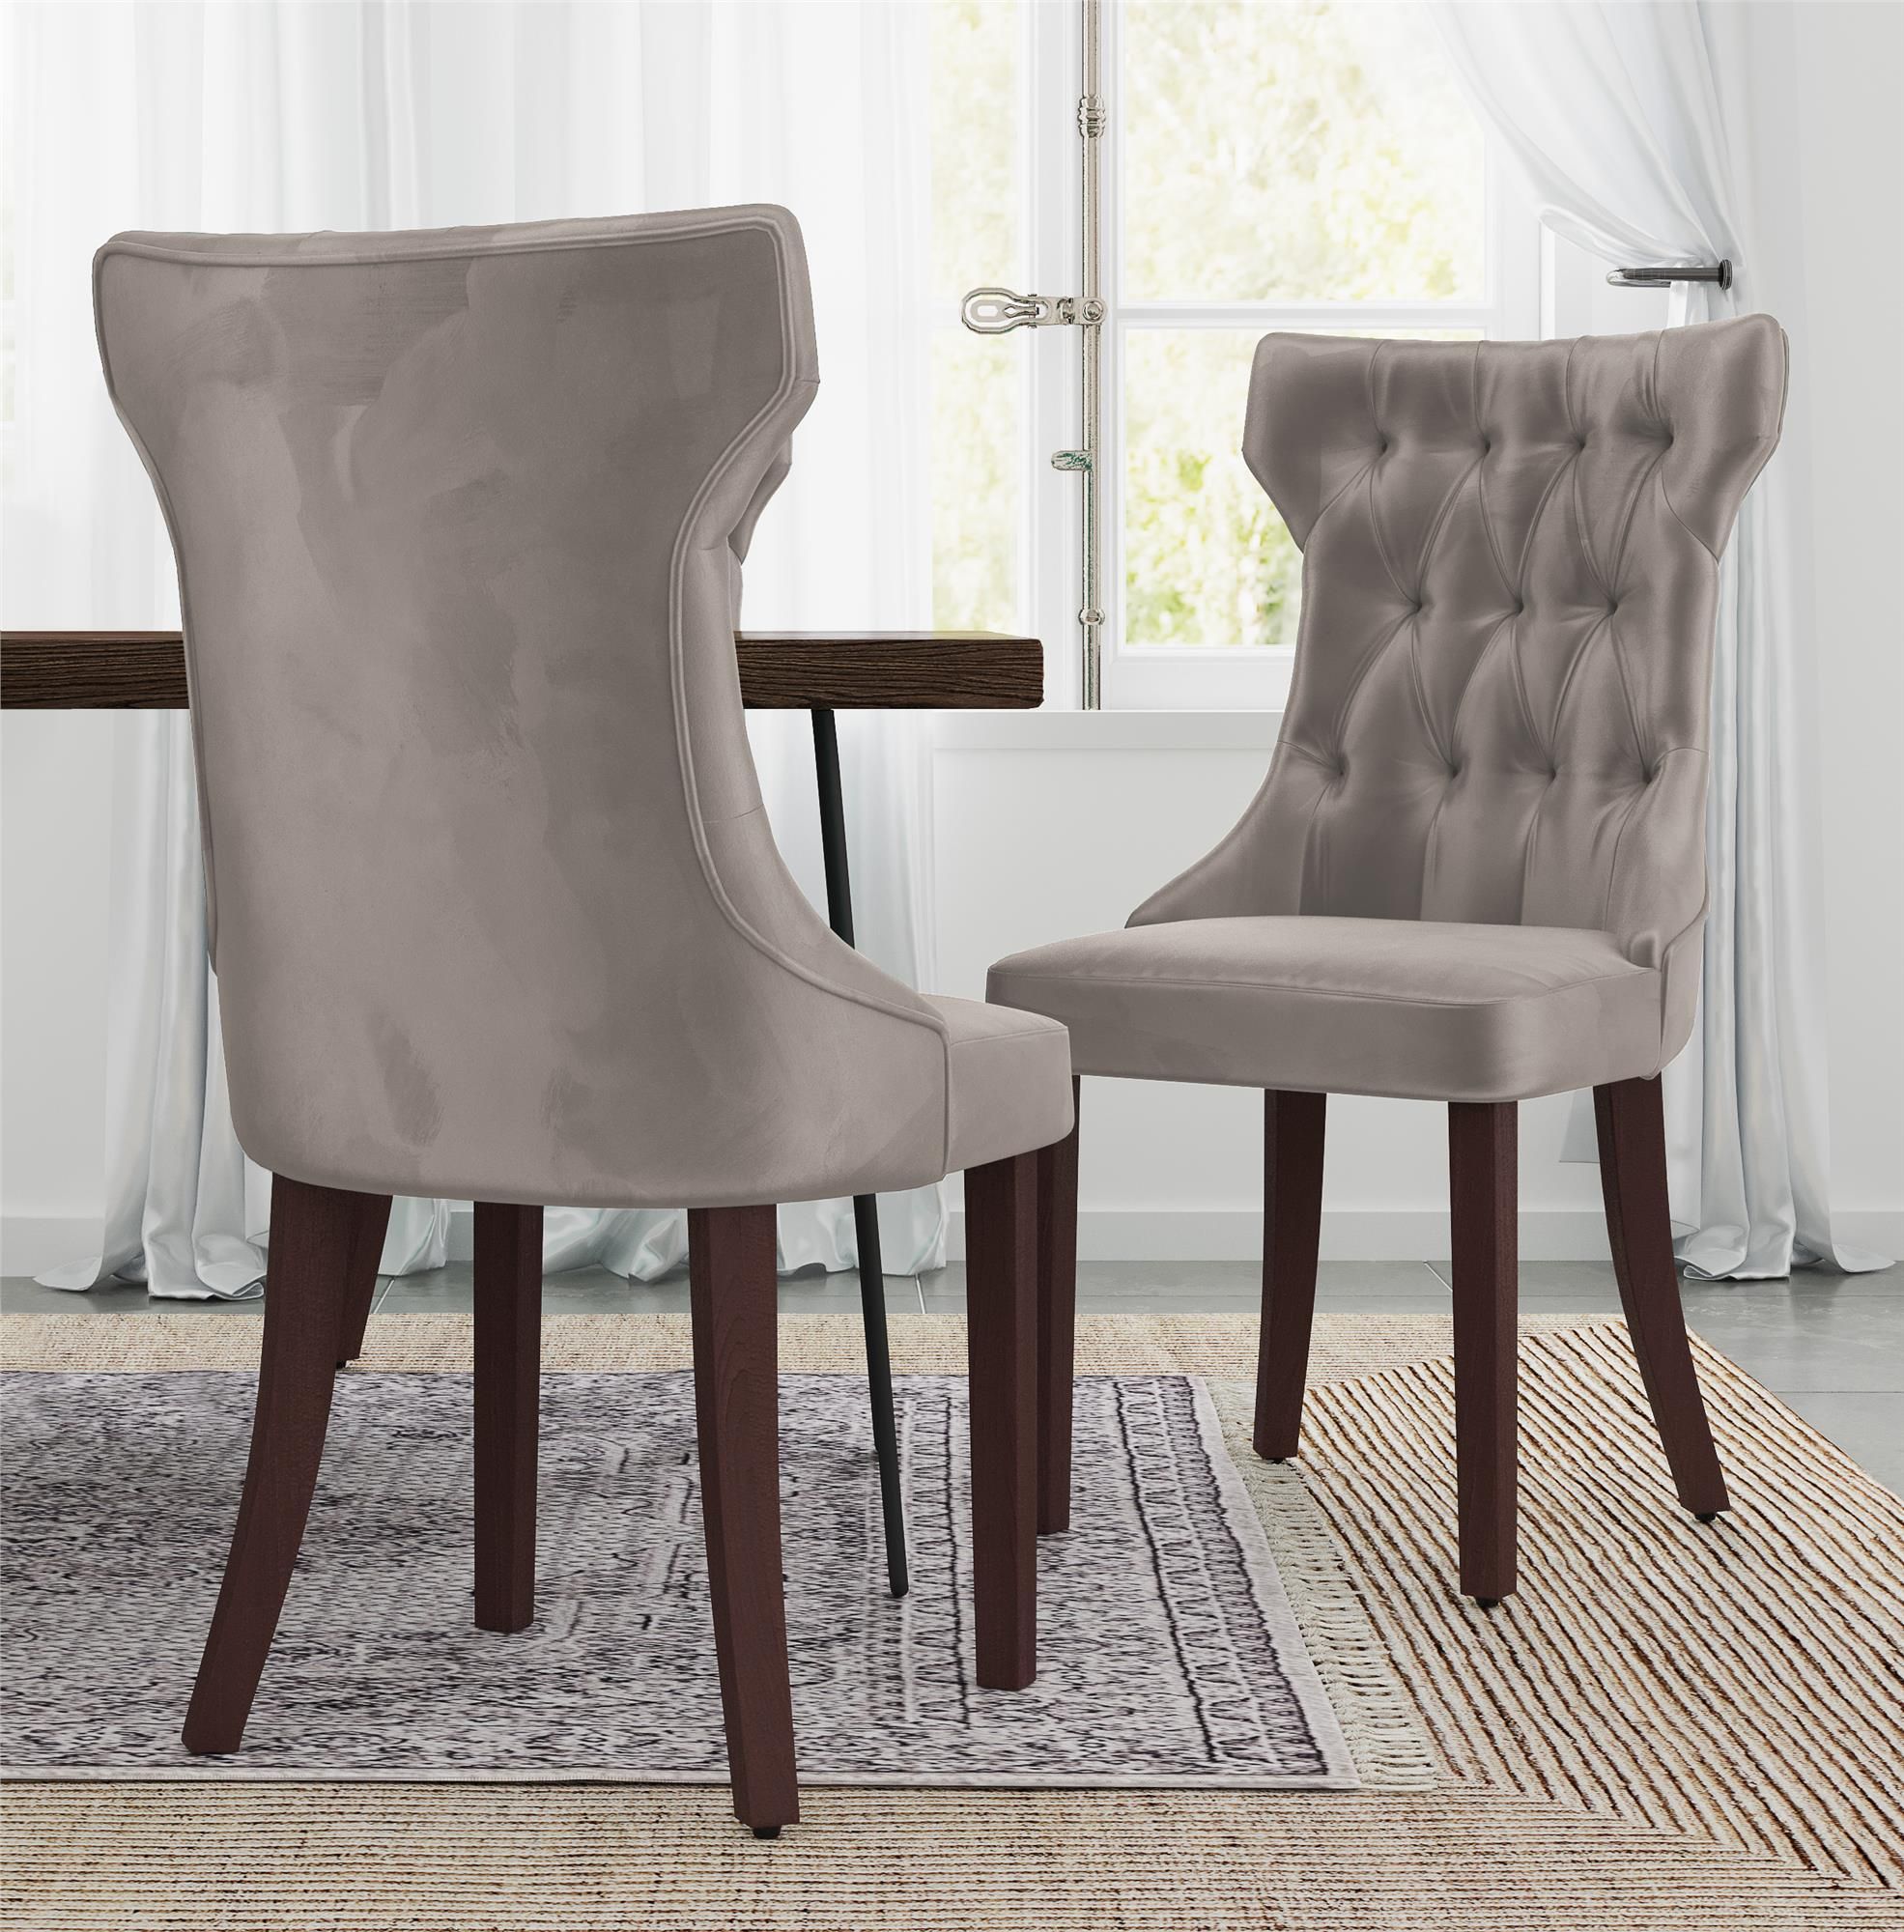 Dorel DHP Clairborne Tufted Dining Chair (2 Pack), Wood, Taupe / Espresso